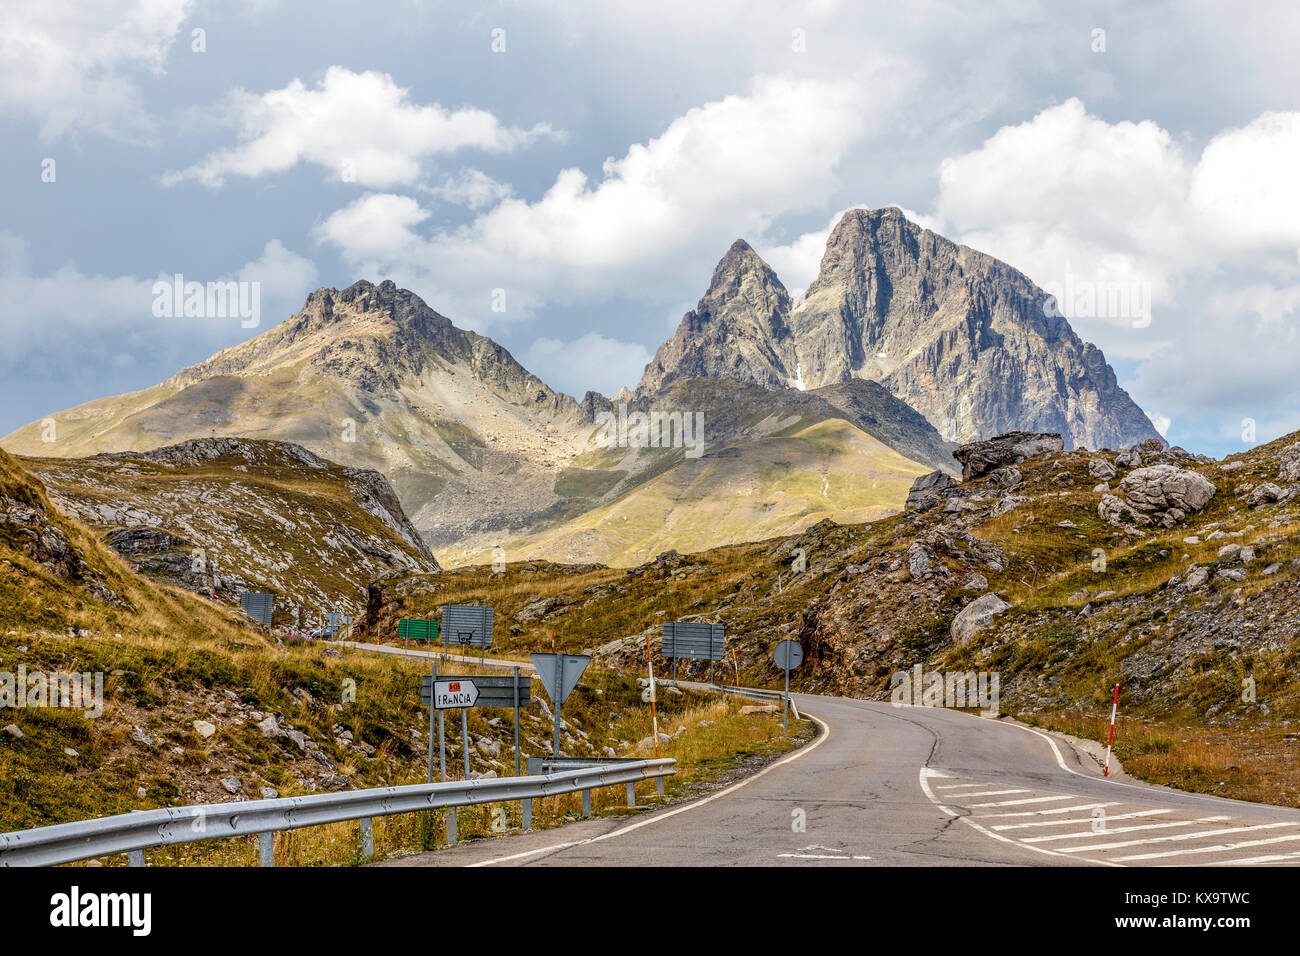 Frontera del Portalet;  the border crossing between Spain and France at the western end of the Pyrenees and at the top end of the Tenna valley.. Stock Photo